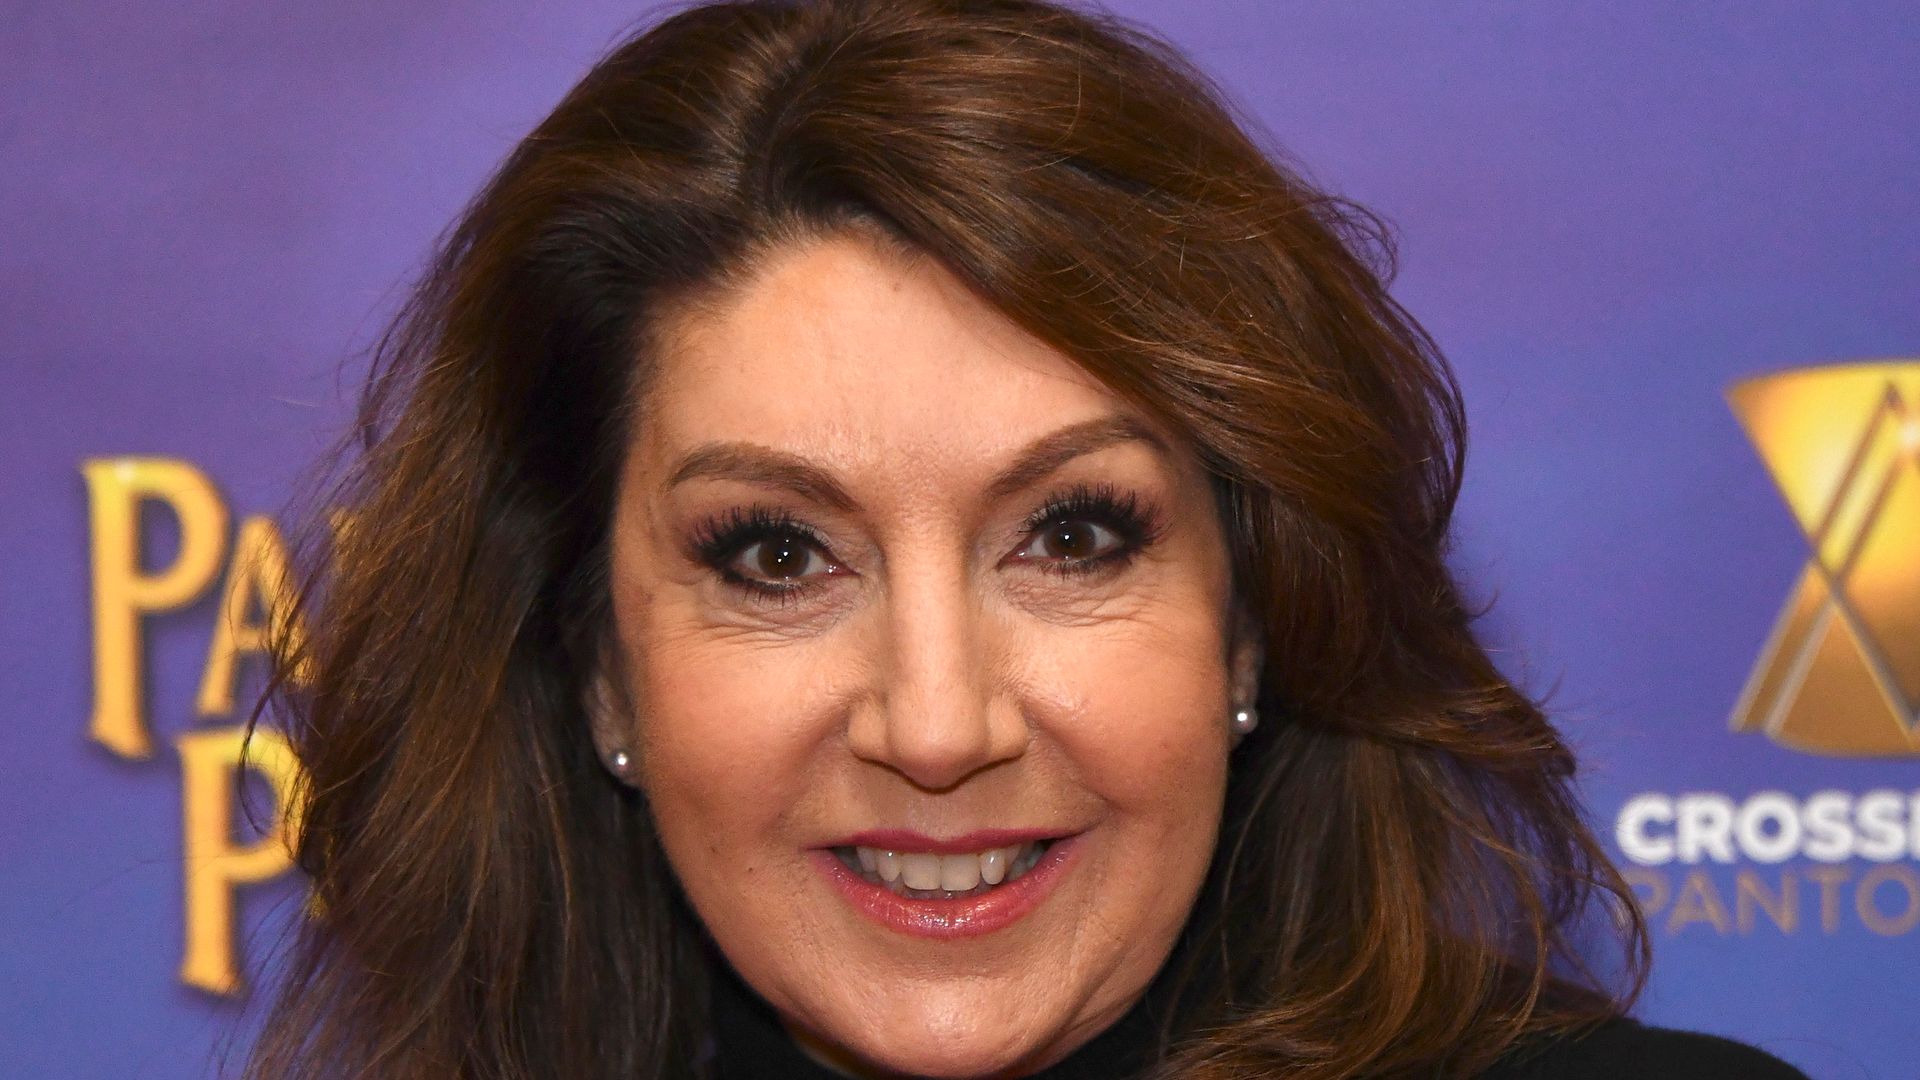 Jane McDonald in black outfit